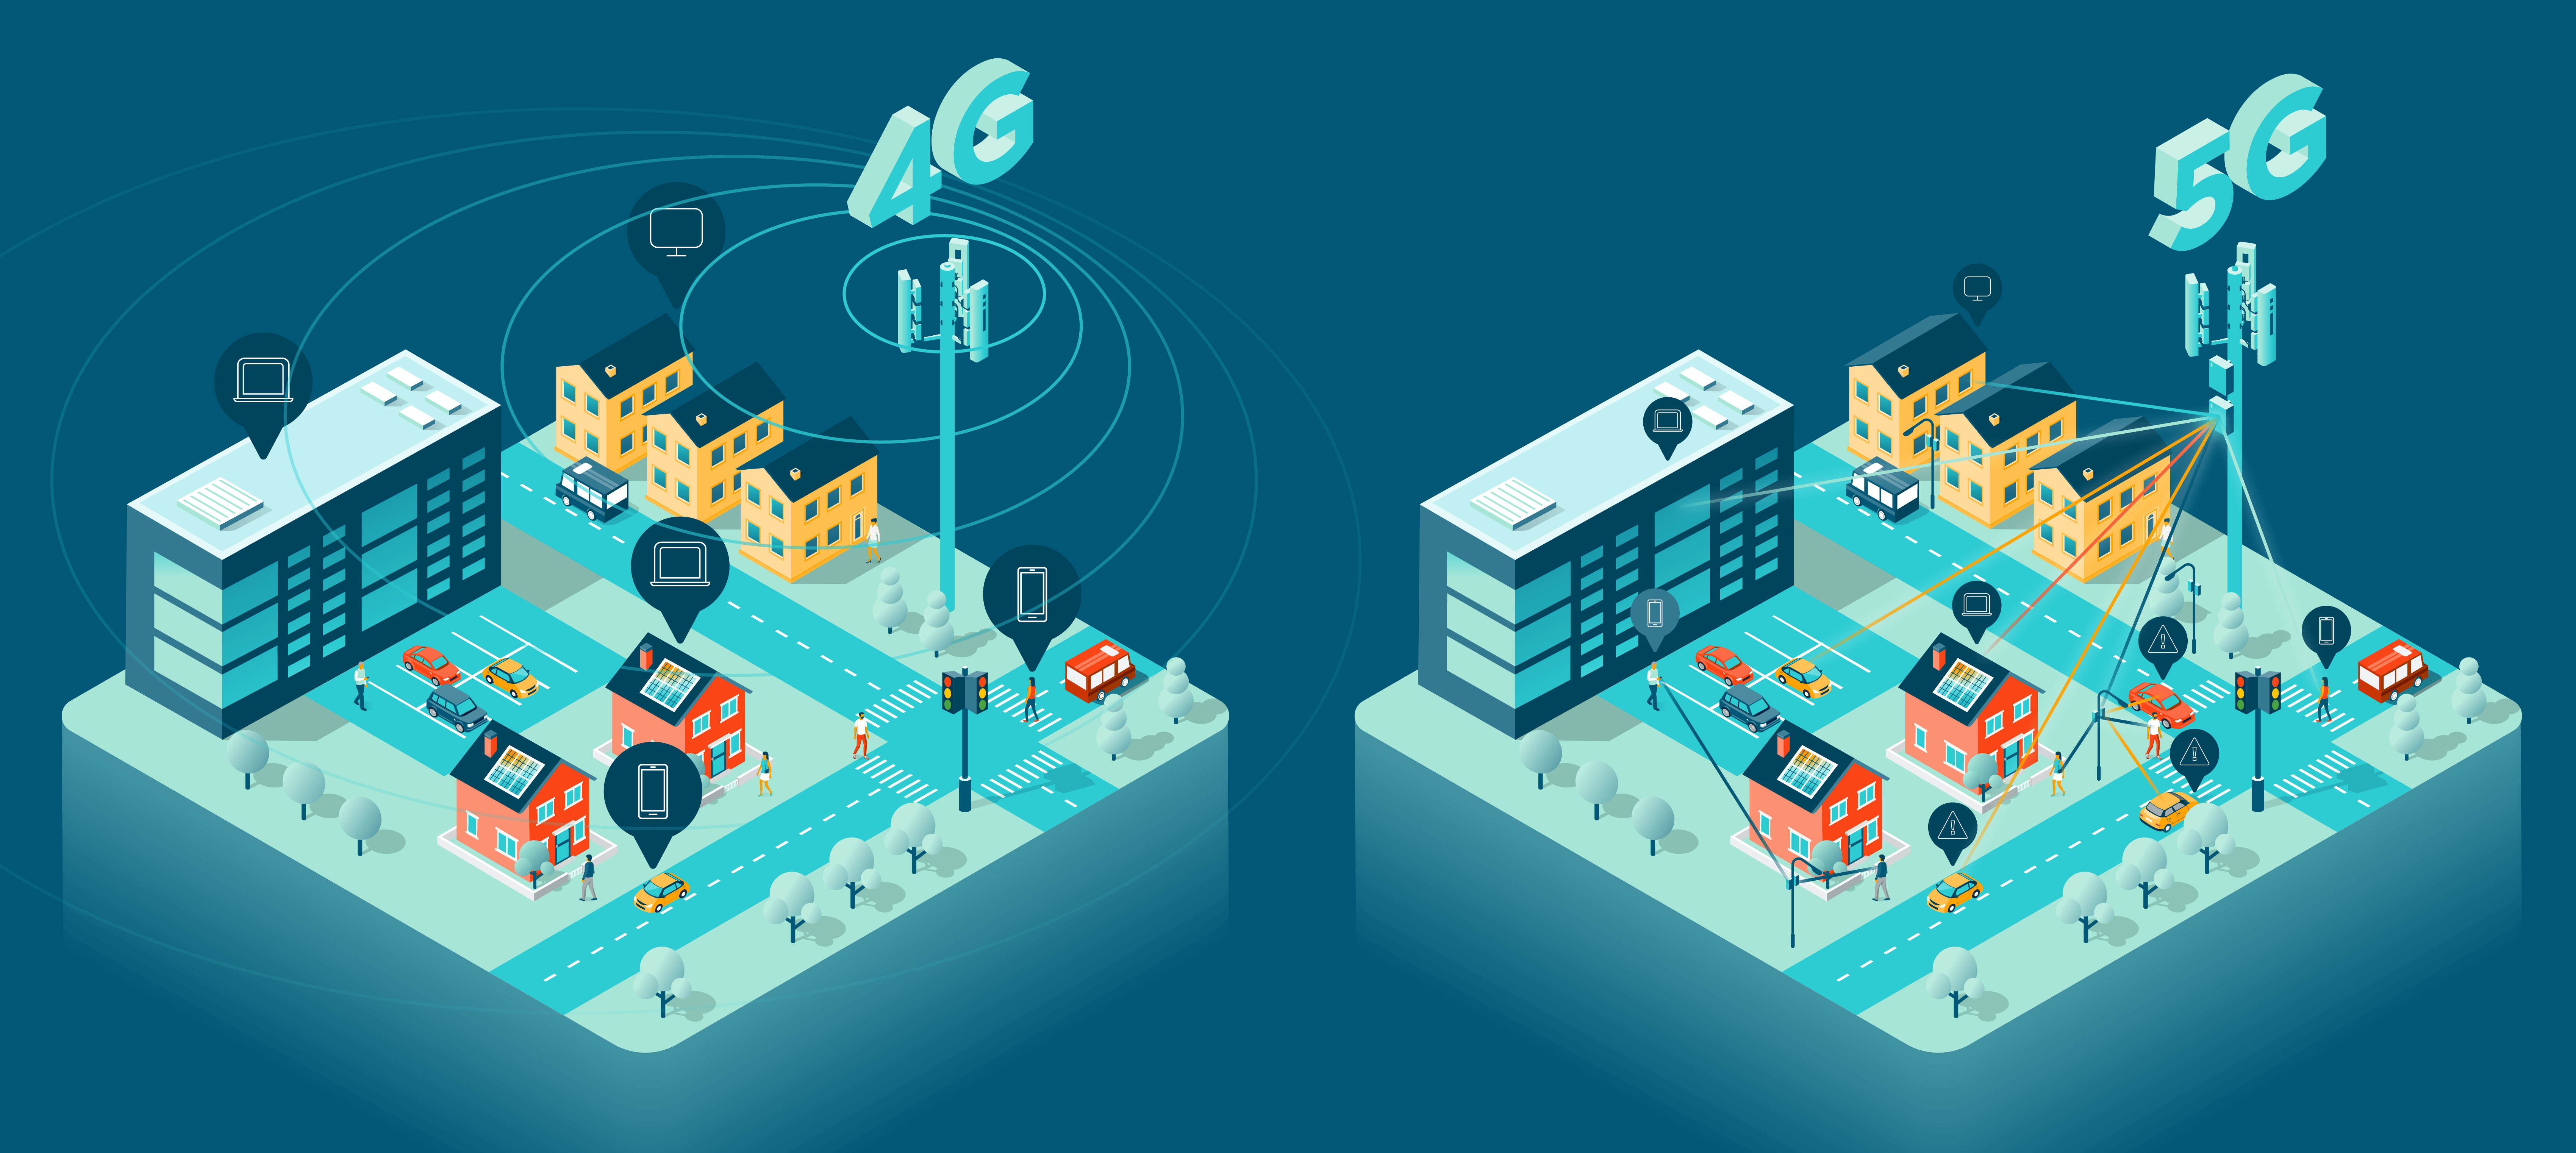 5G New Radio info graphic, 4G network base station compared to a 5G urban installation with active directive antennas.